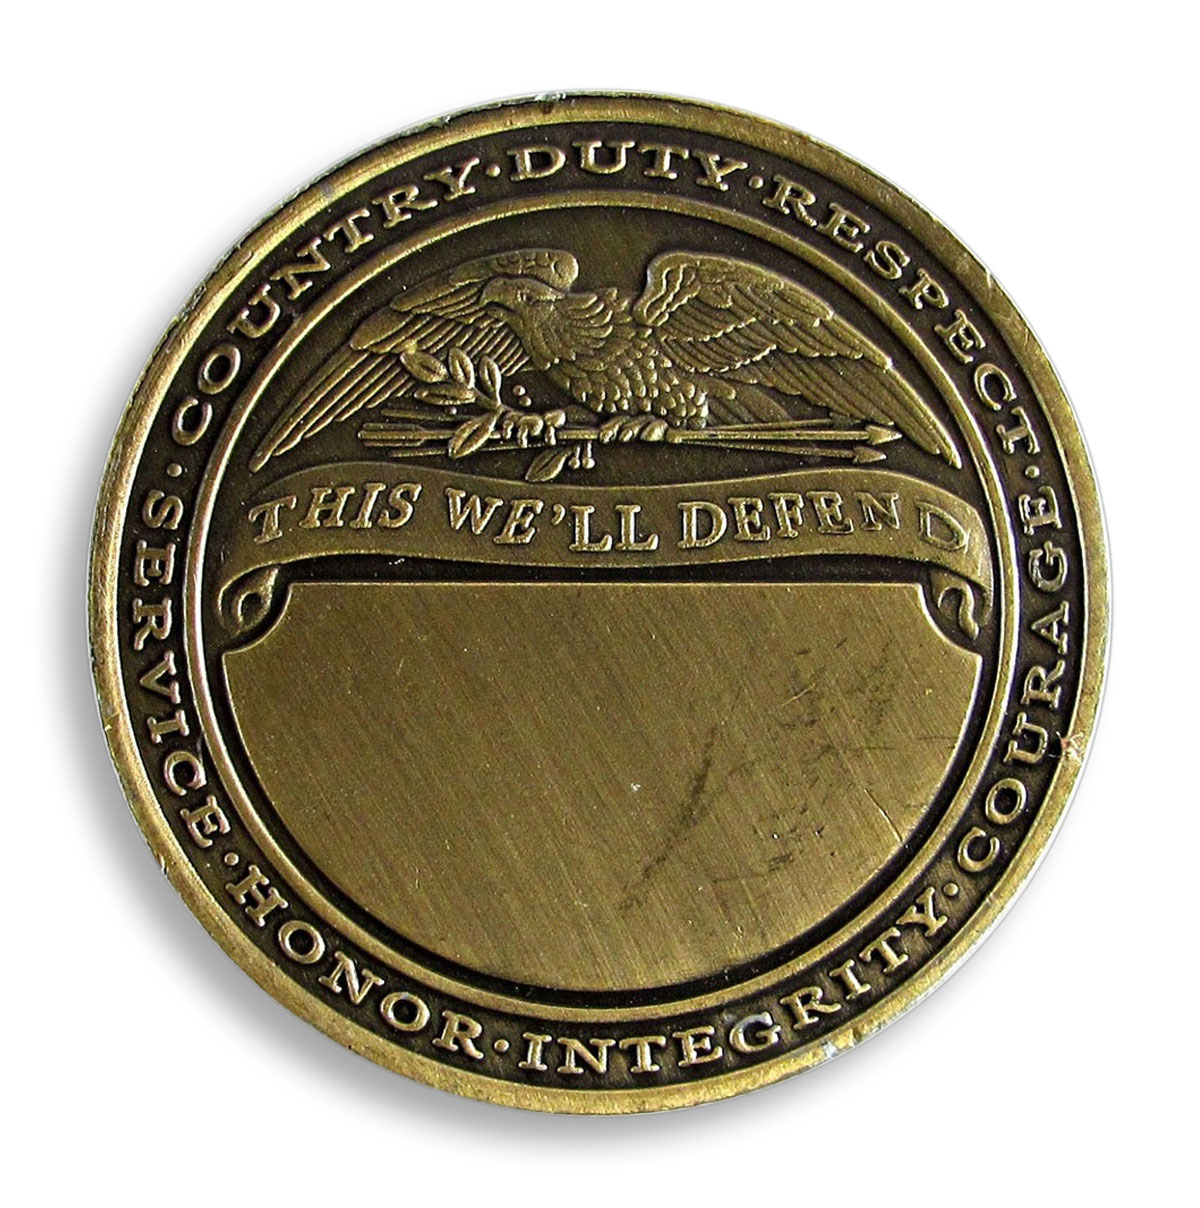 USA, Marine Corps, Real American Super Heroes, Courage, Military,Duty,Token